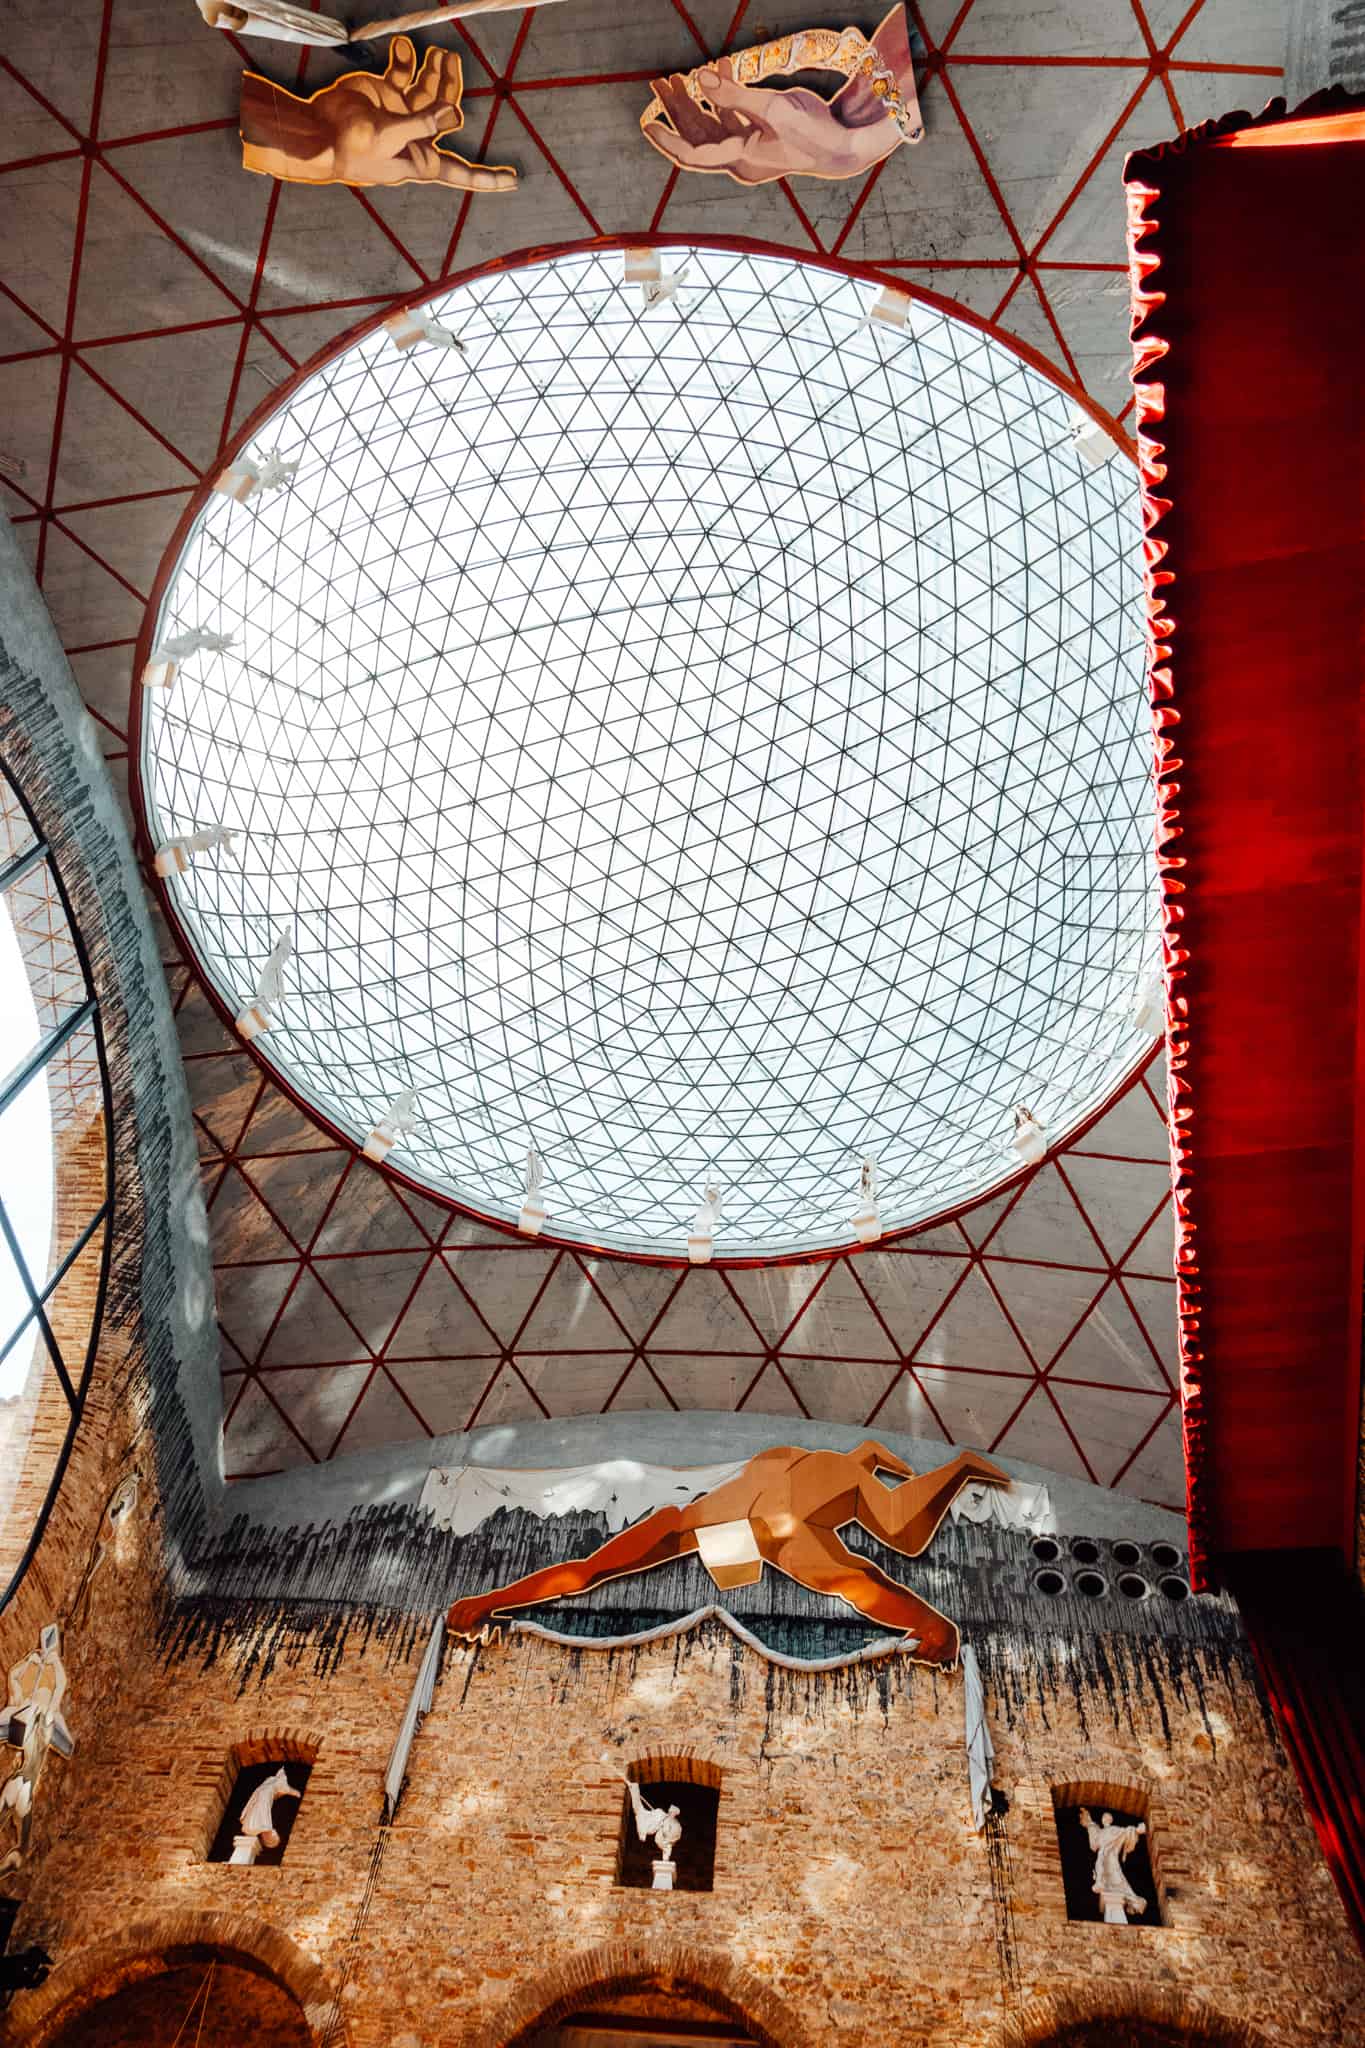 Grand Hall of the Dali Theatre Museum in Figueres